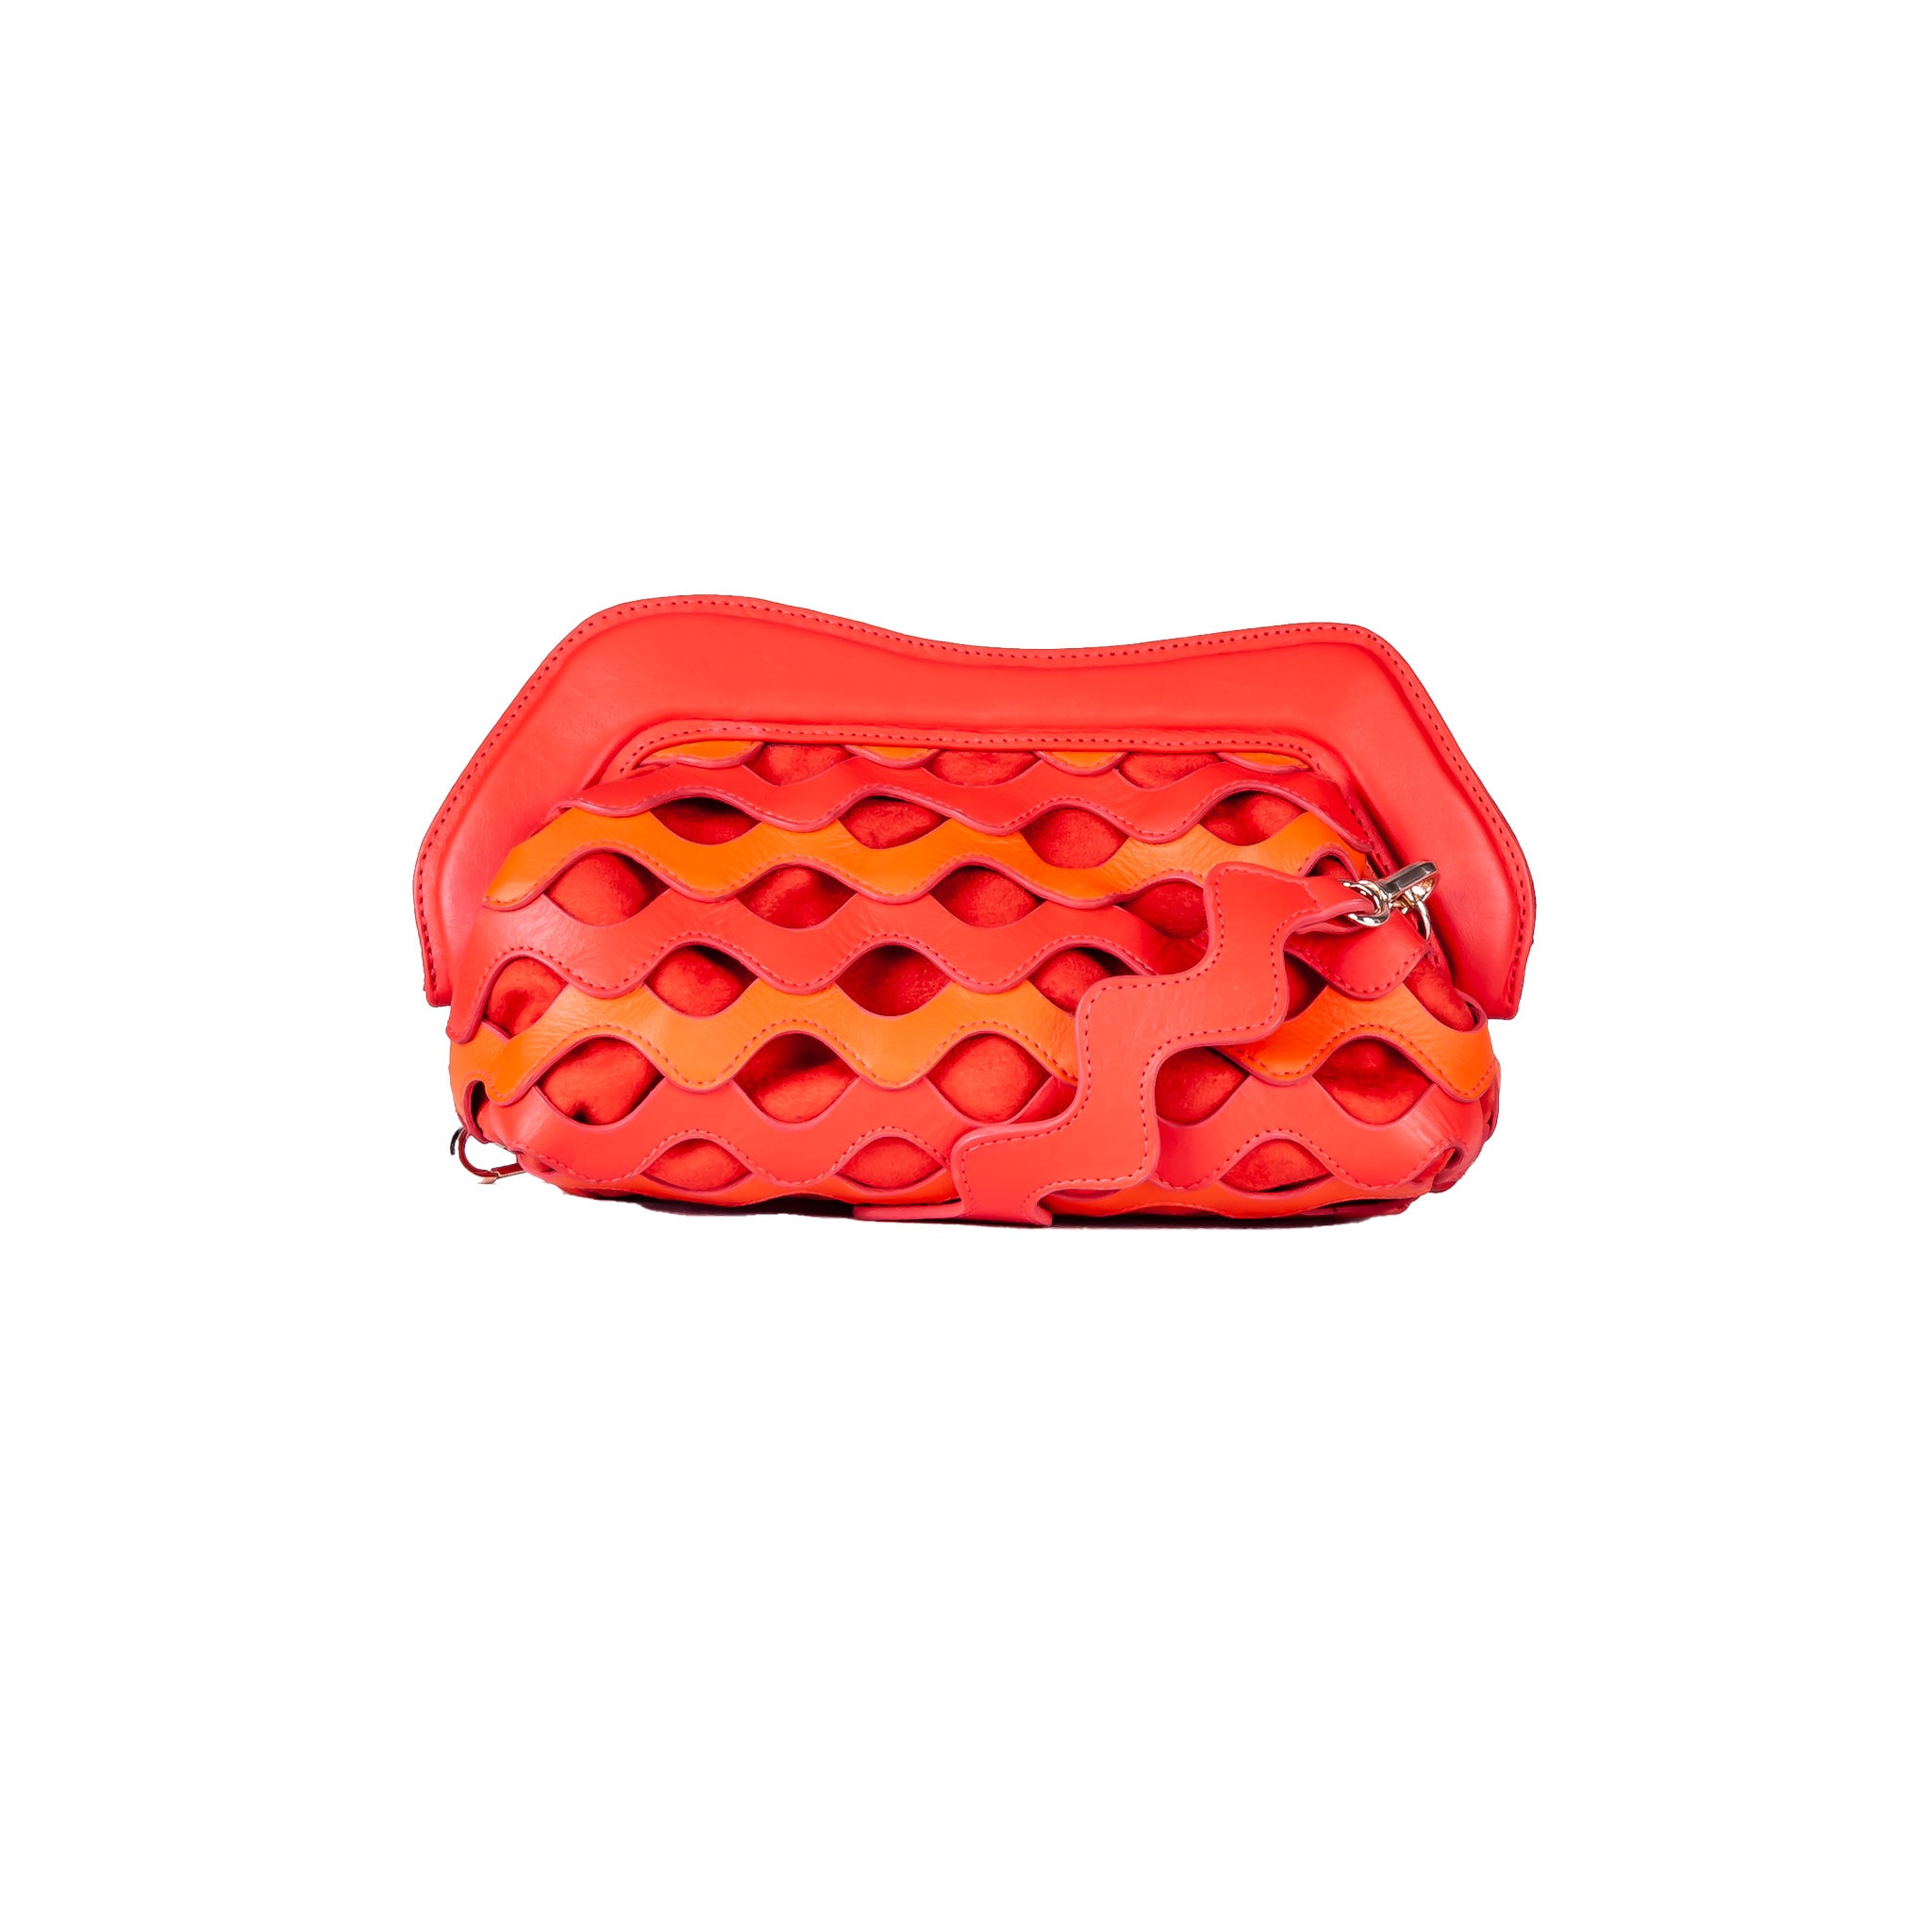 Waves Clutch in Coral and Sunset